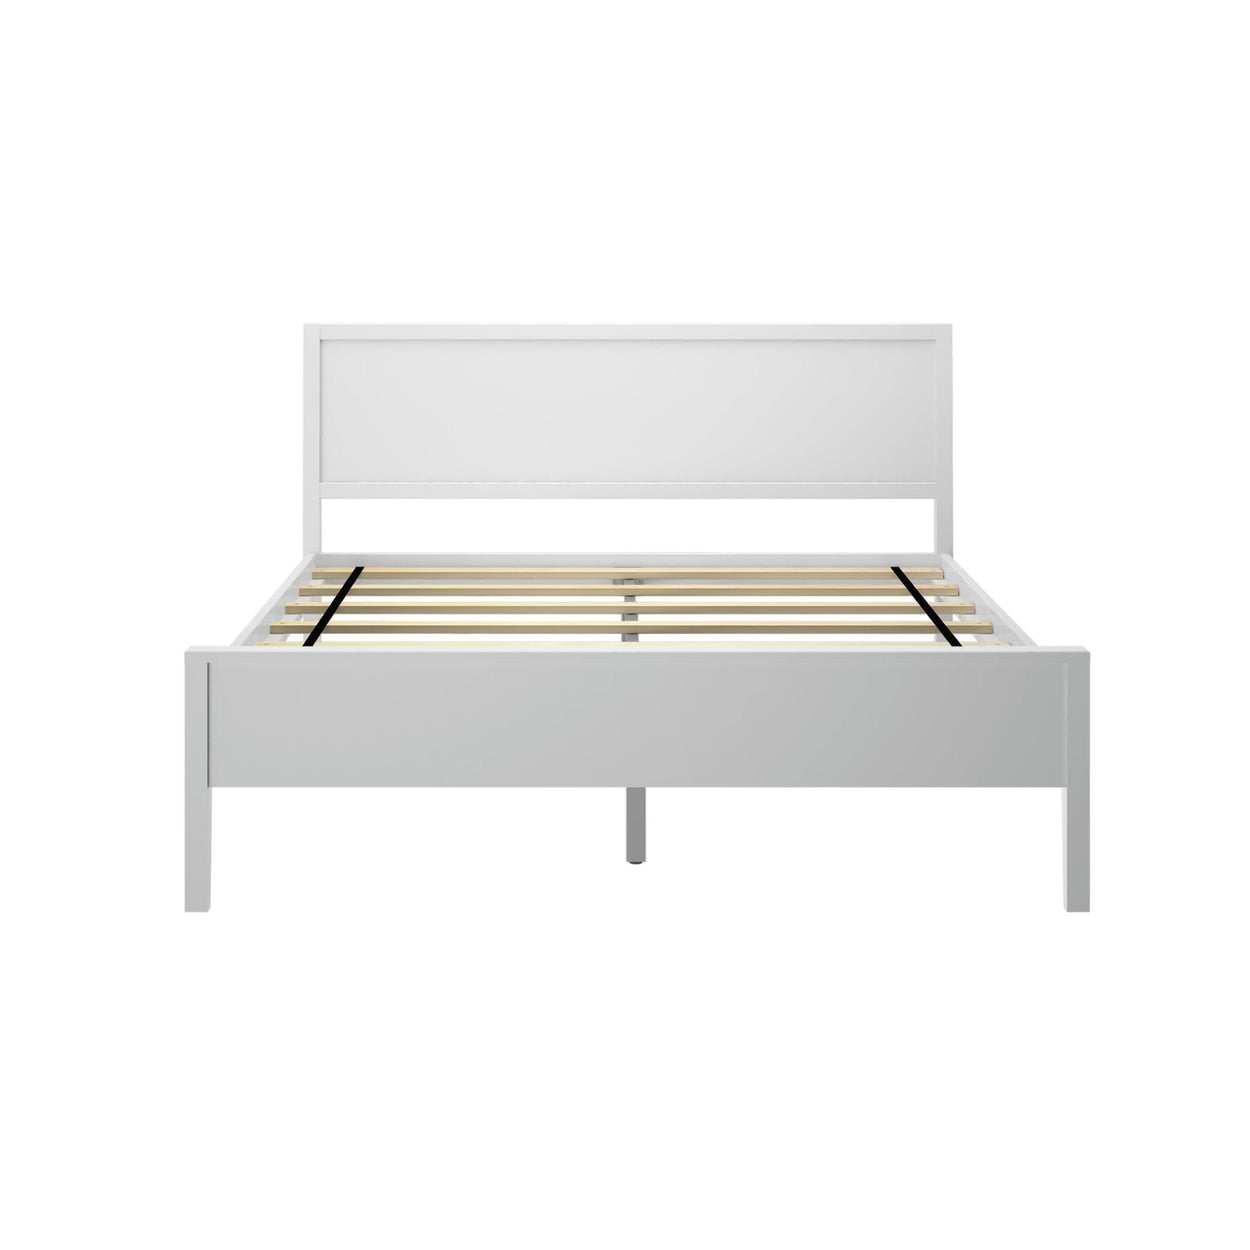 Modern Queen-Size Bed with Panel Headboard Single Beds Plank+Beam 